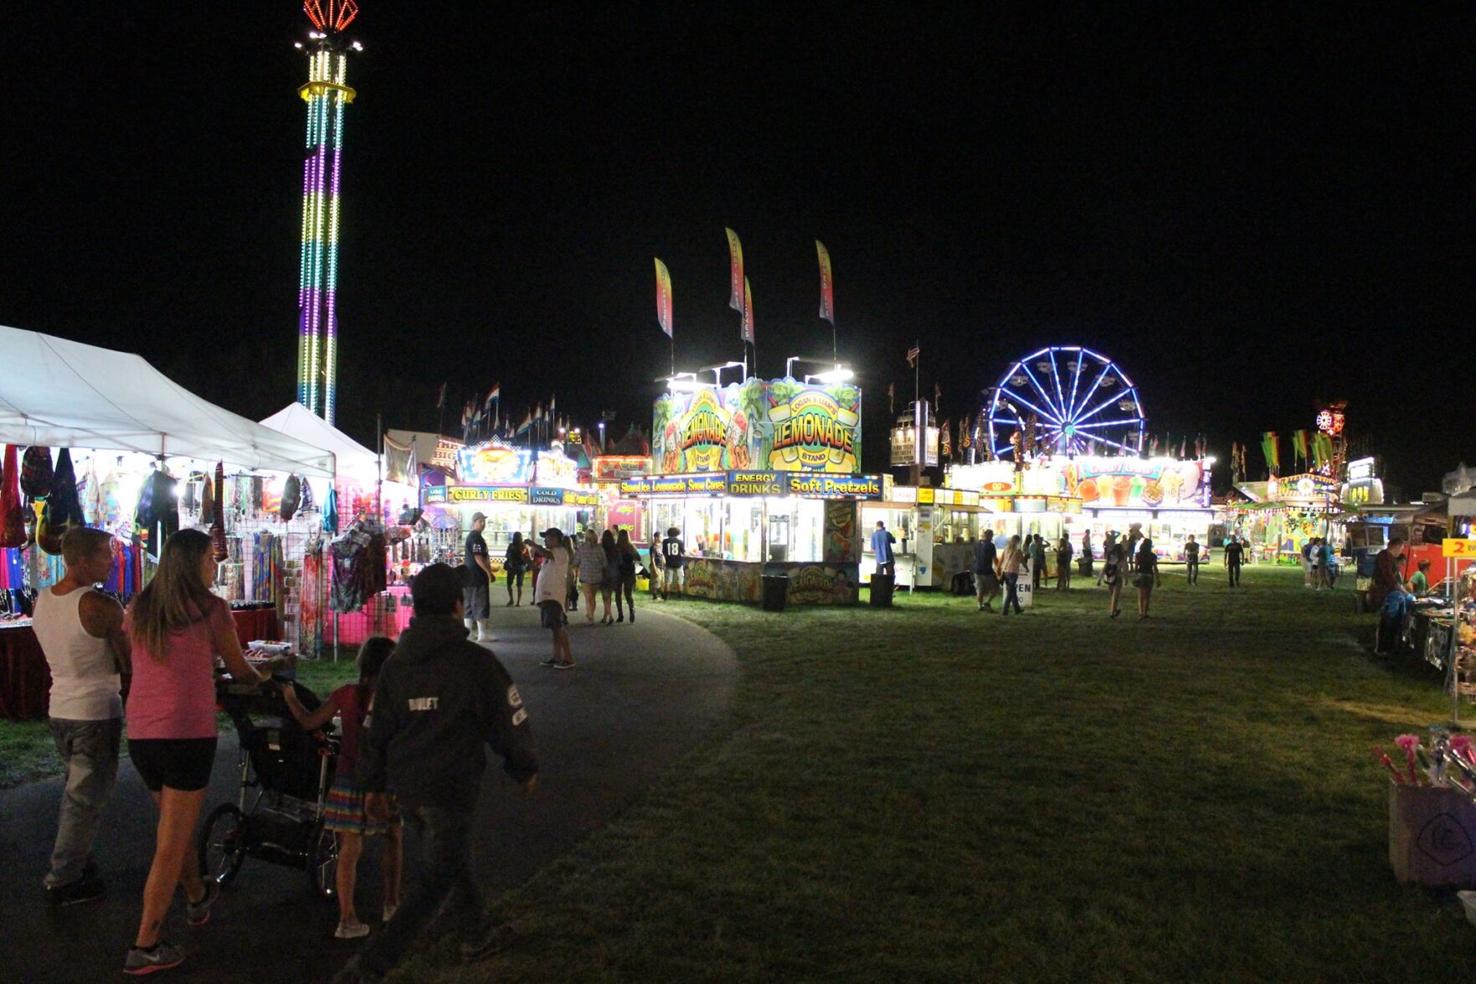 Grant County Fair to begin Tuesday with largerthanusual crowds